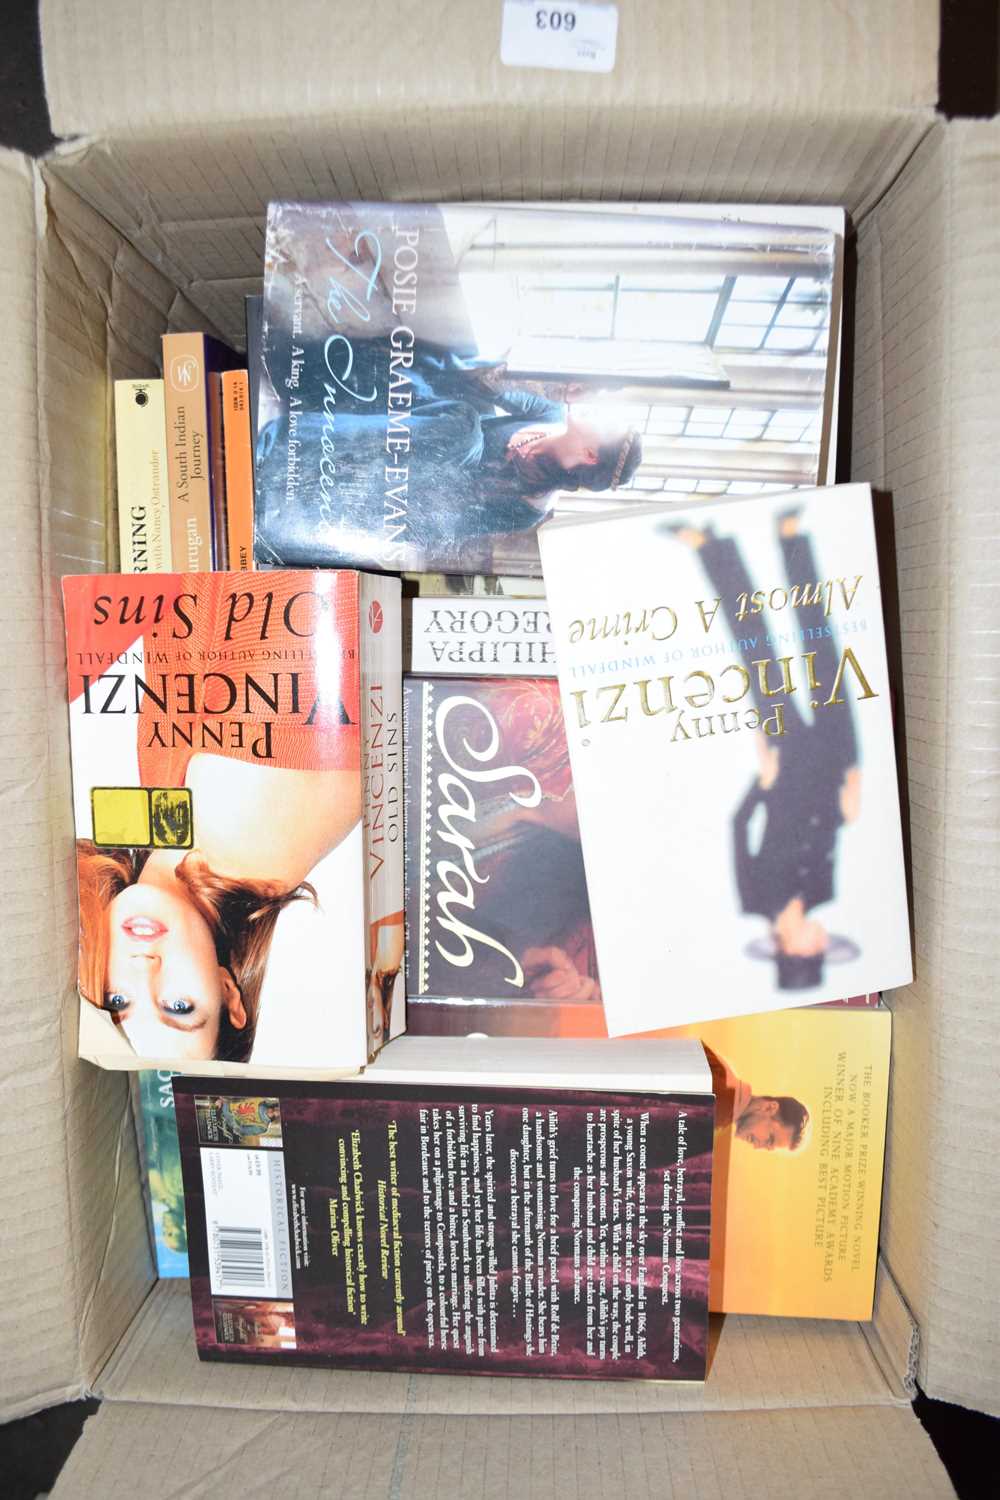 One box of paperback books